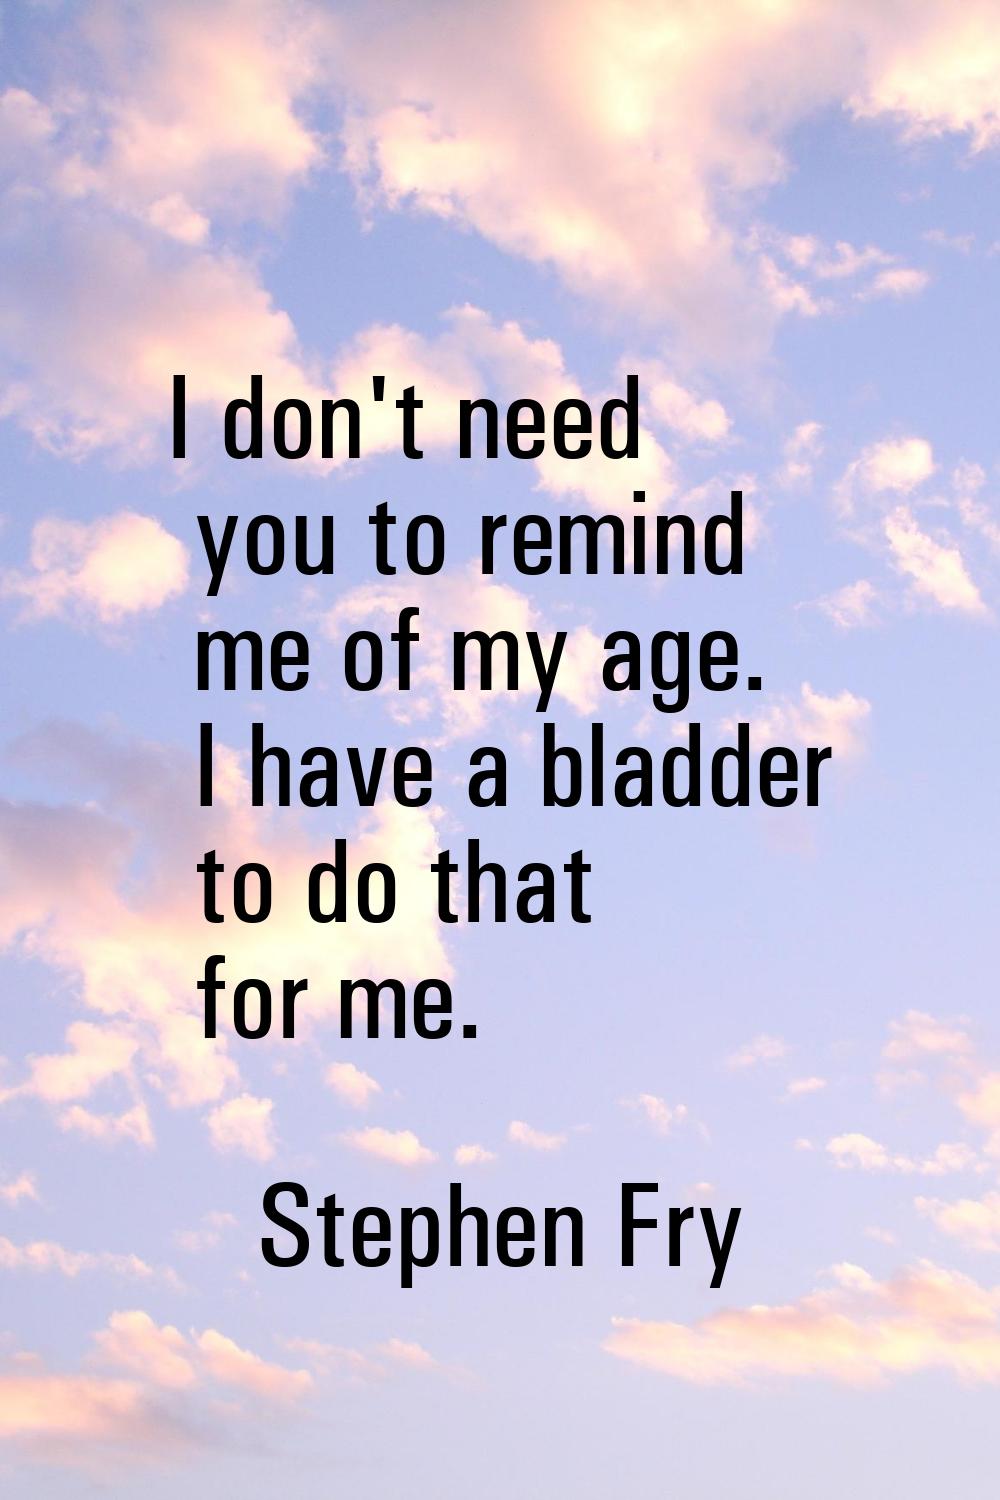 I don't need you to remind me of my age. I have a bladder to do that for me.